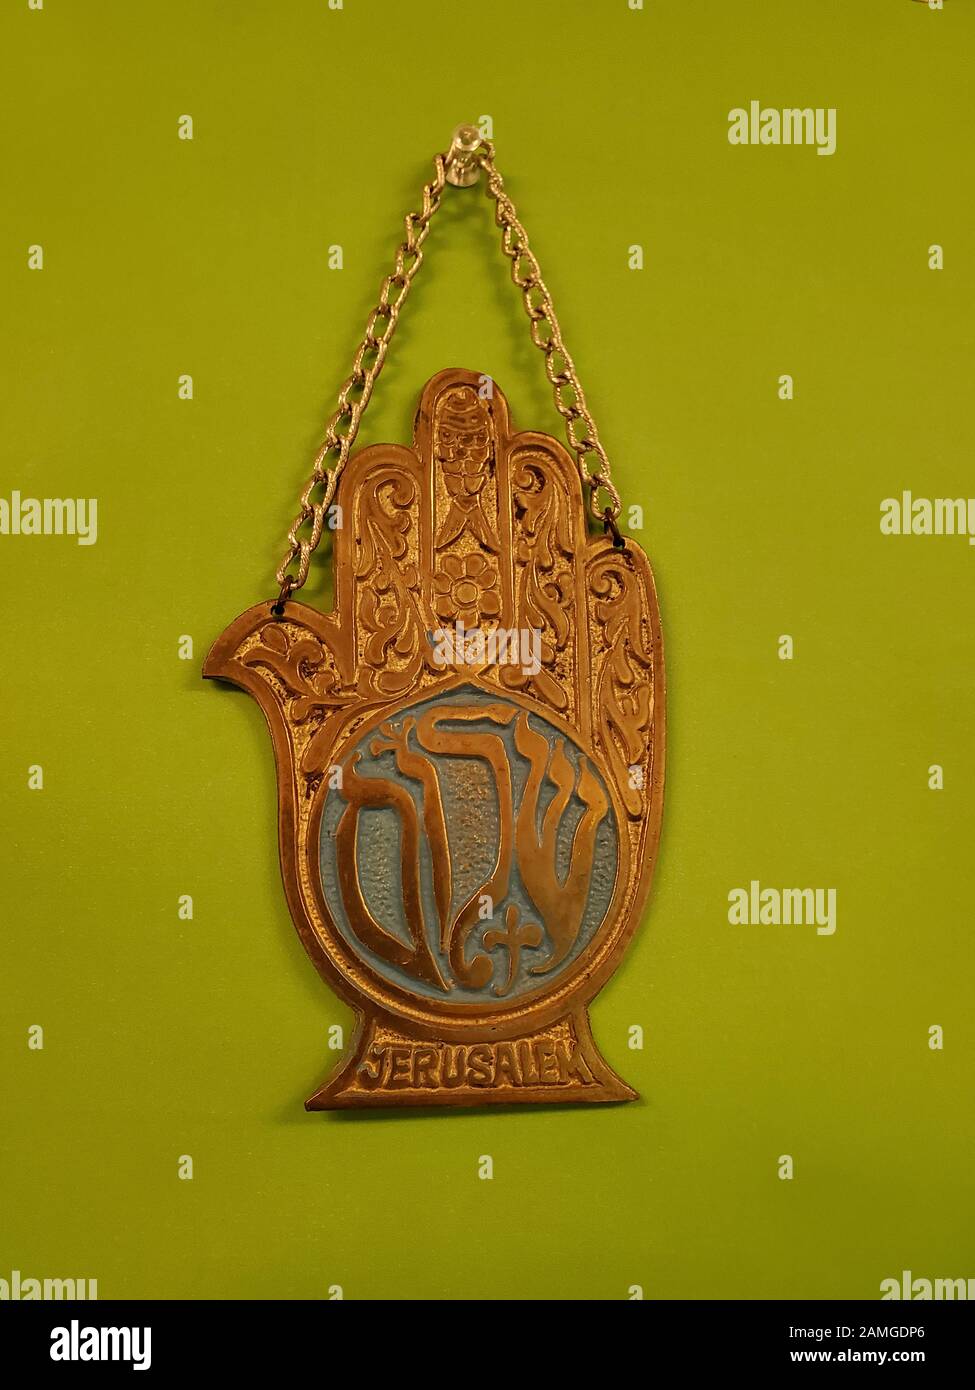 Close-up of traditional Jewish Chamsa, a charm worn to combat the Evil Eye in Jewish mysticism (Kaballah), on a light green background, November 18, 2019. () Stock Photo